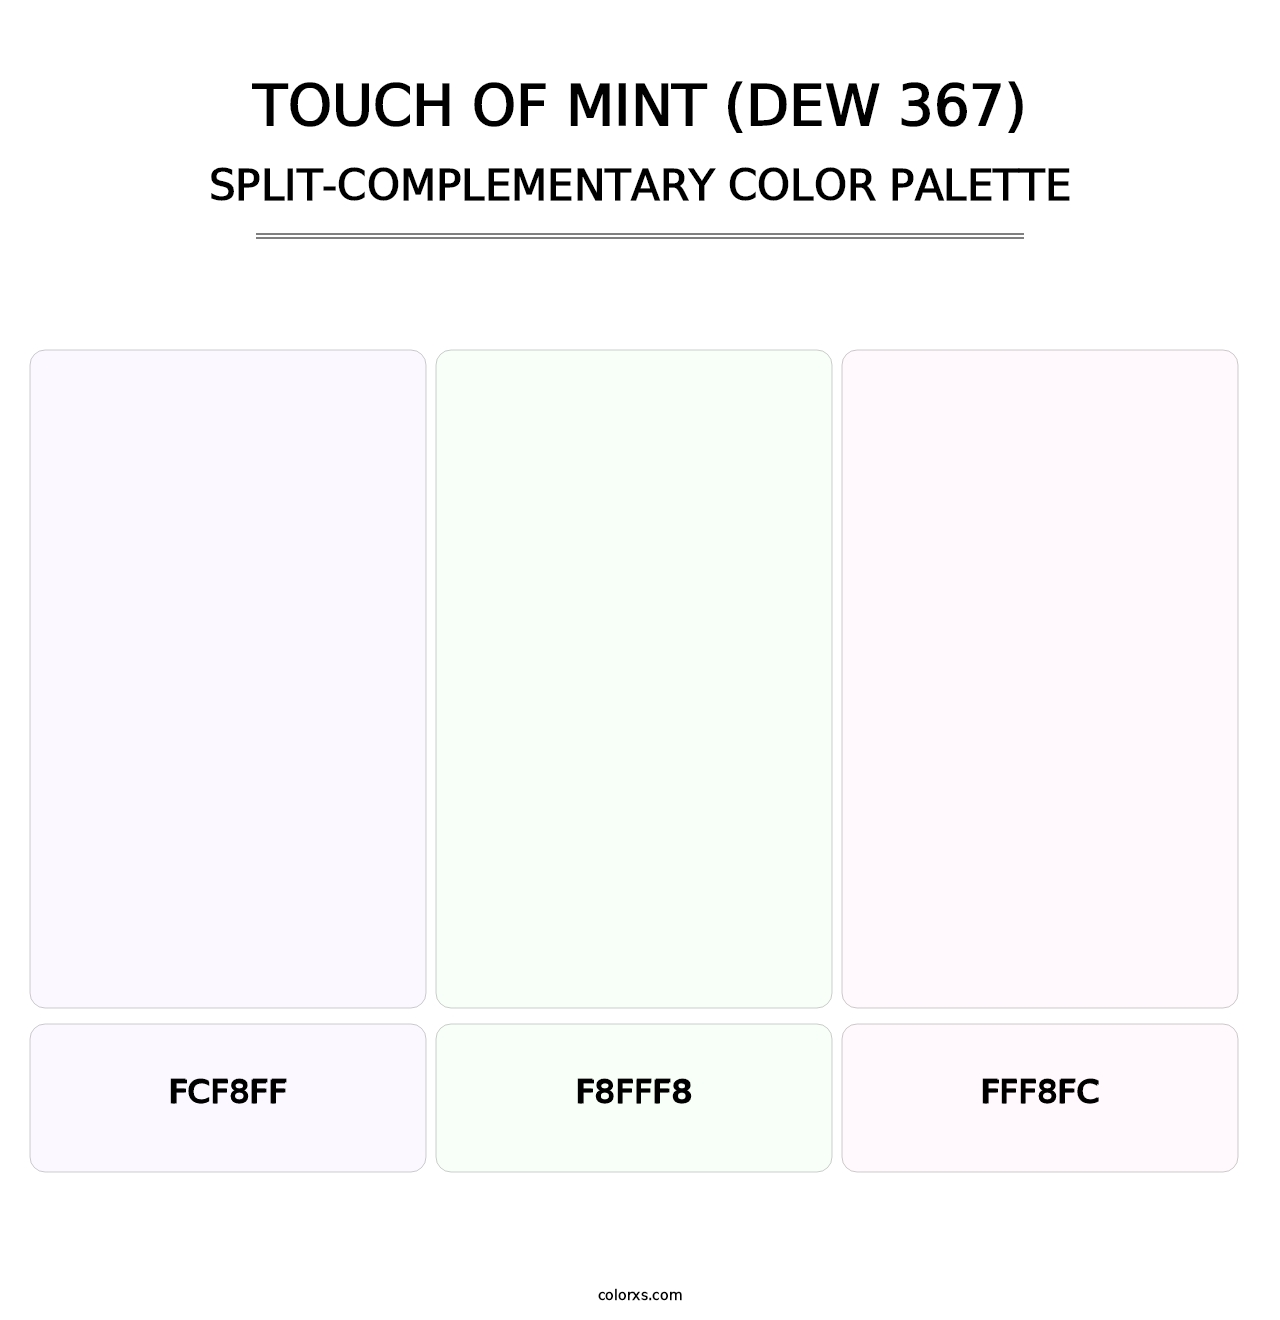 Touch of Mint (DEW 367) - Split-Complementary Color Palette